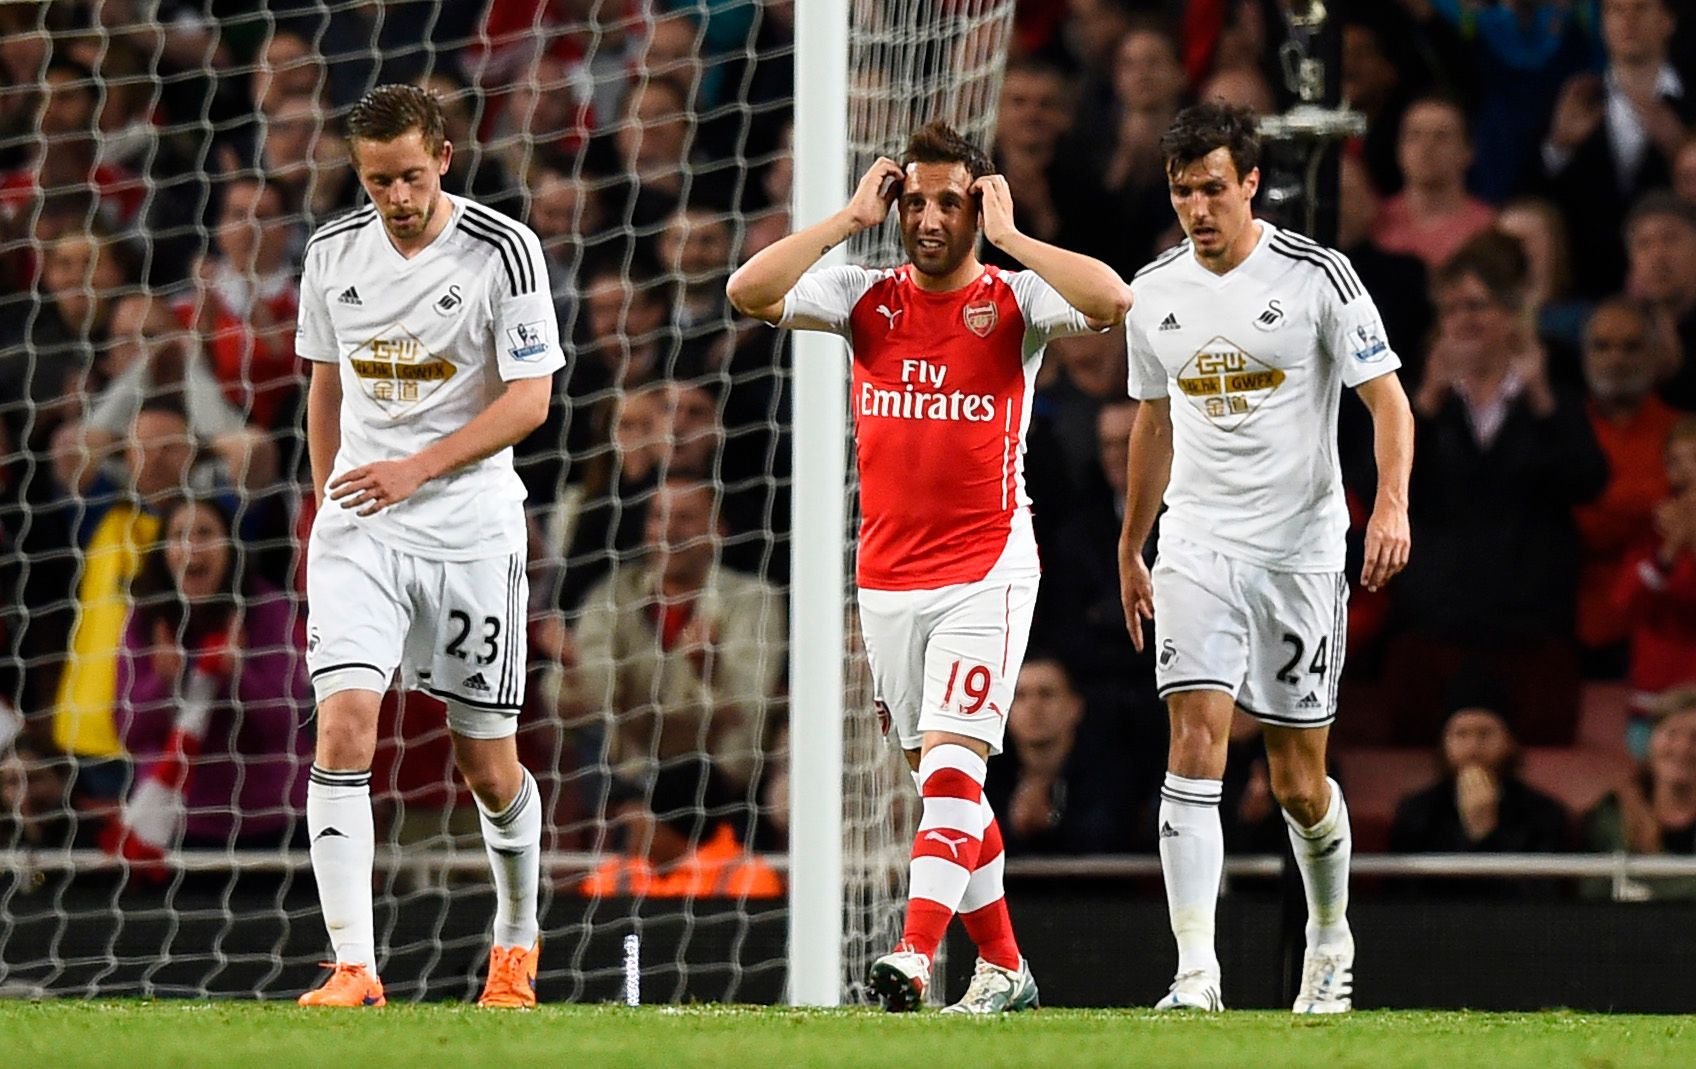 Football: Arsenal's Santi Cazorla looks dejected after missing a chance to score